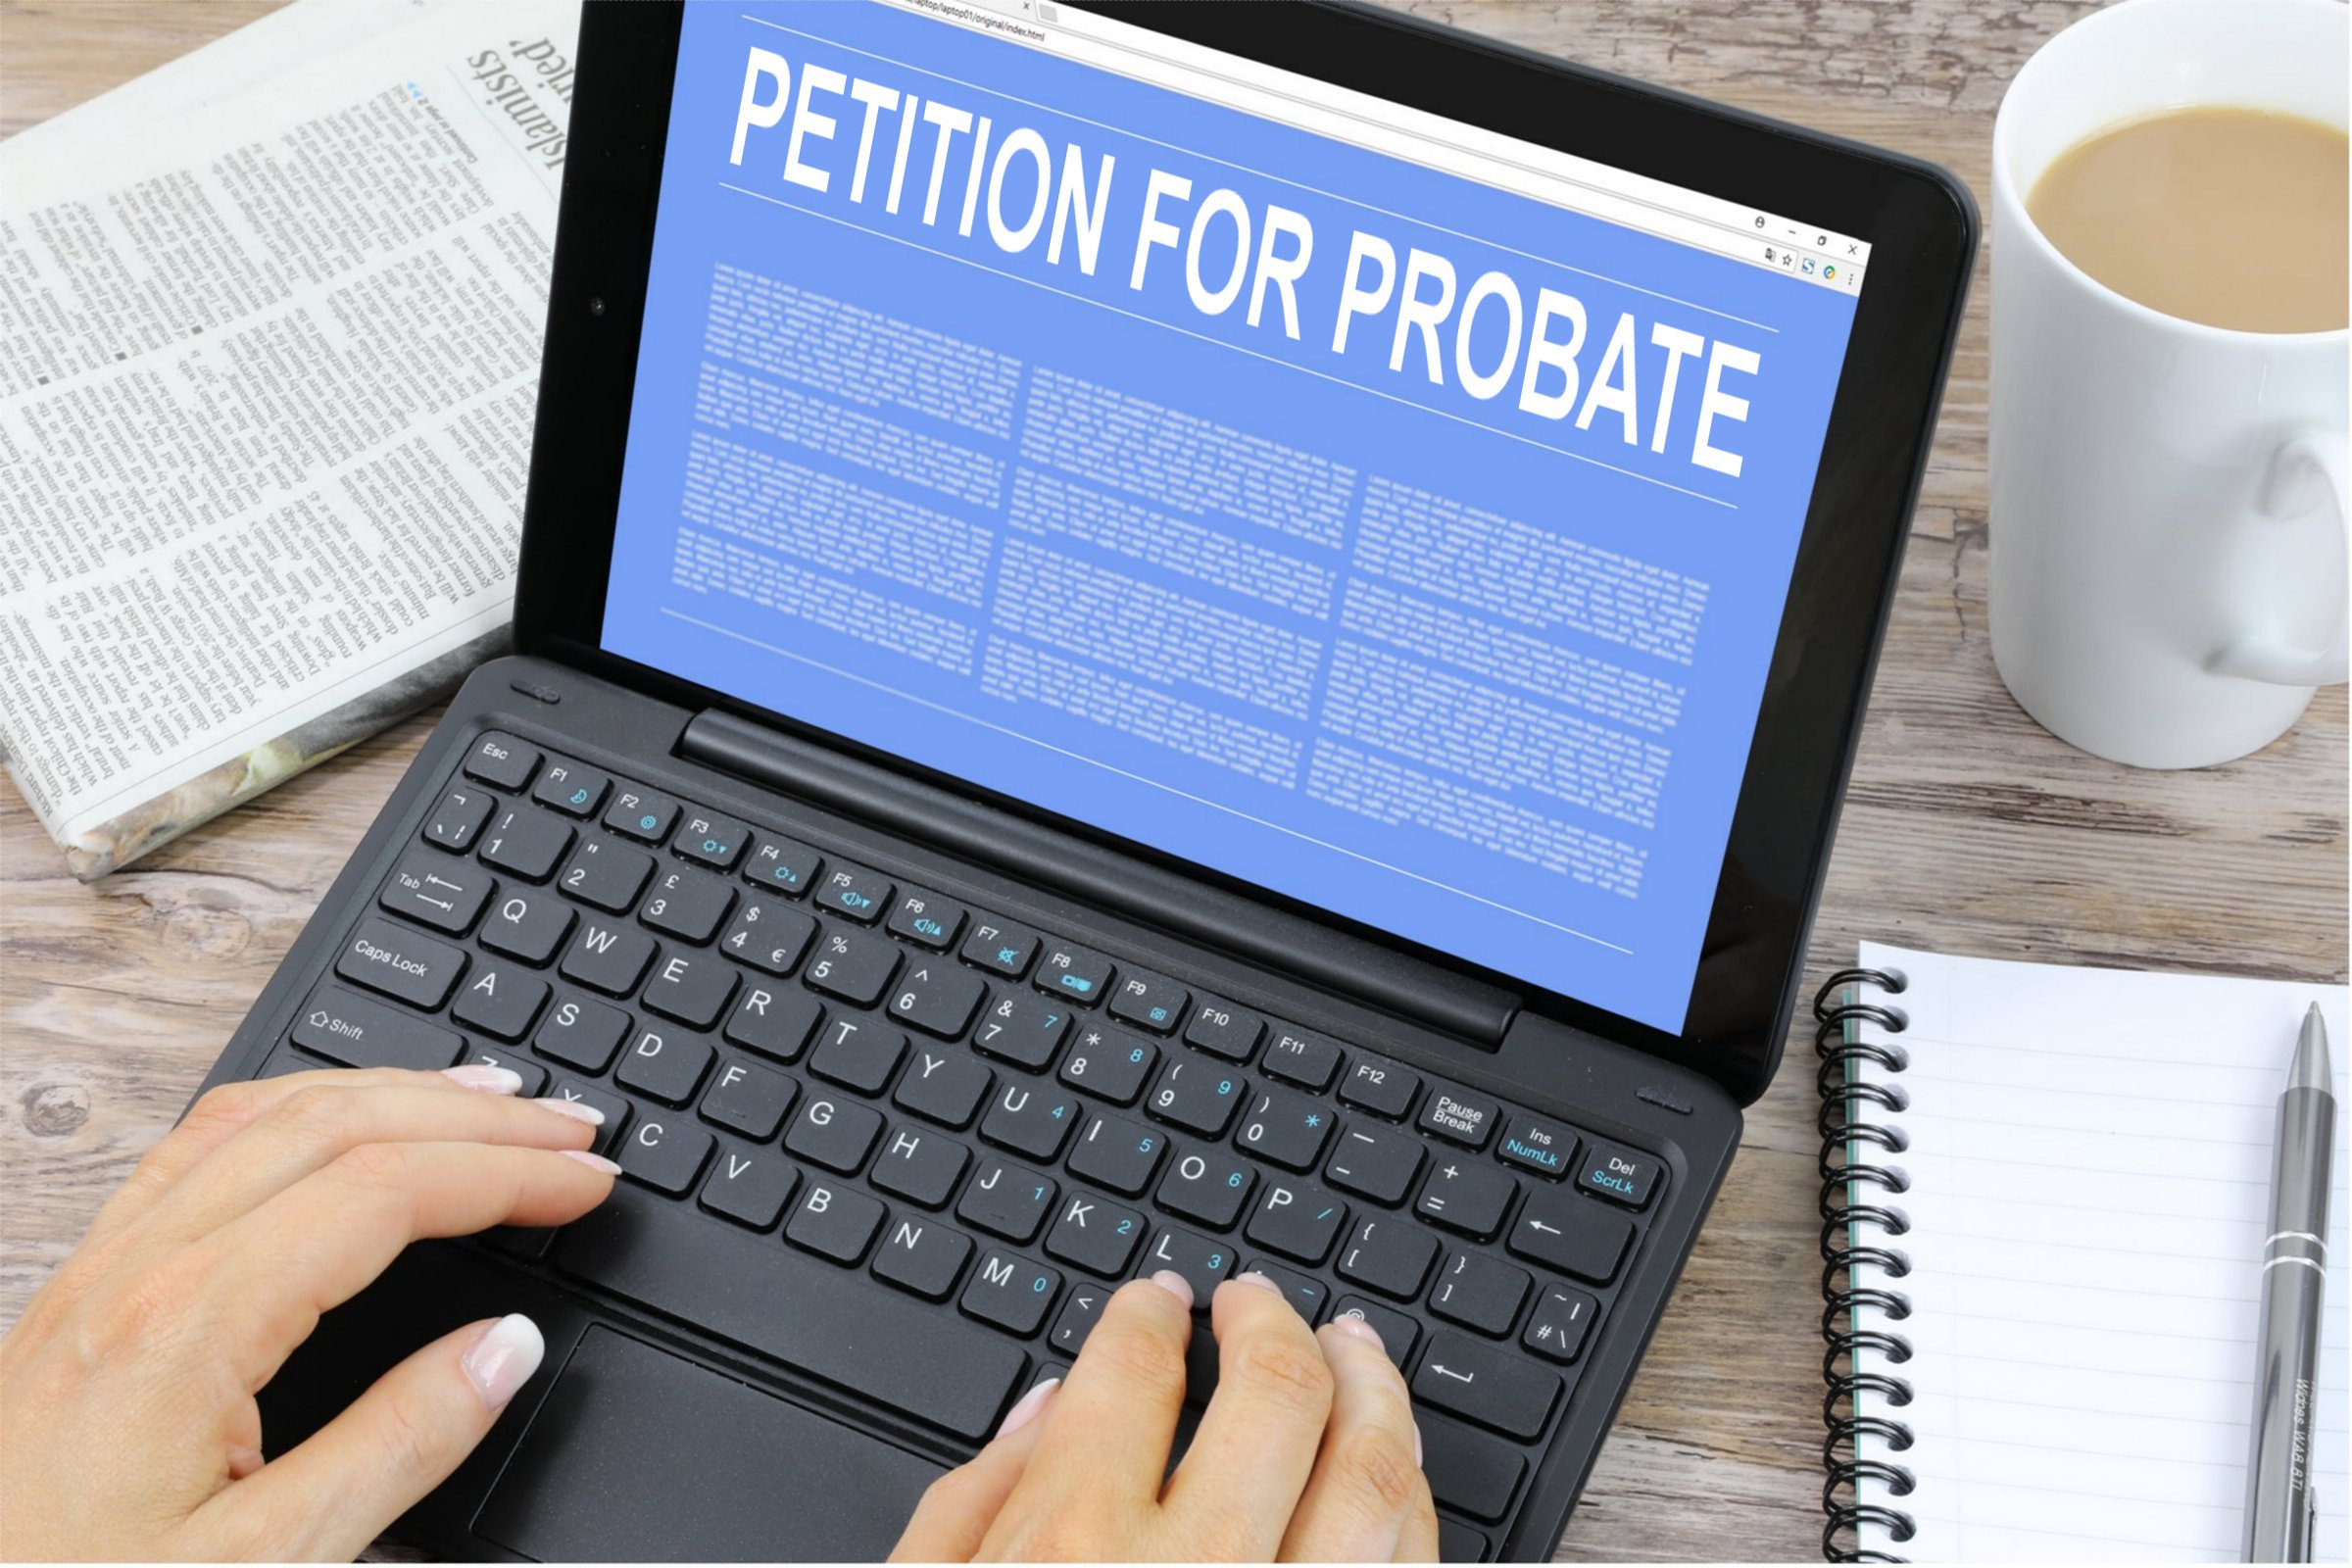 Petition for Probate